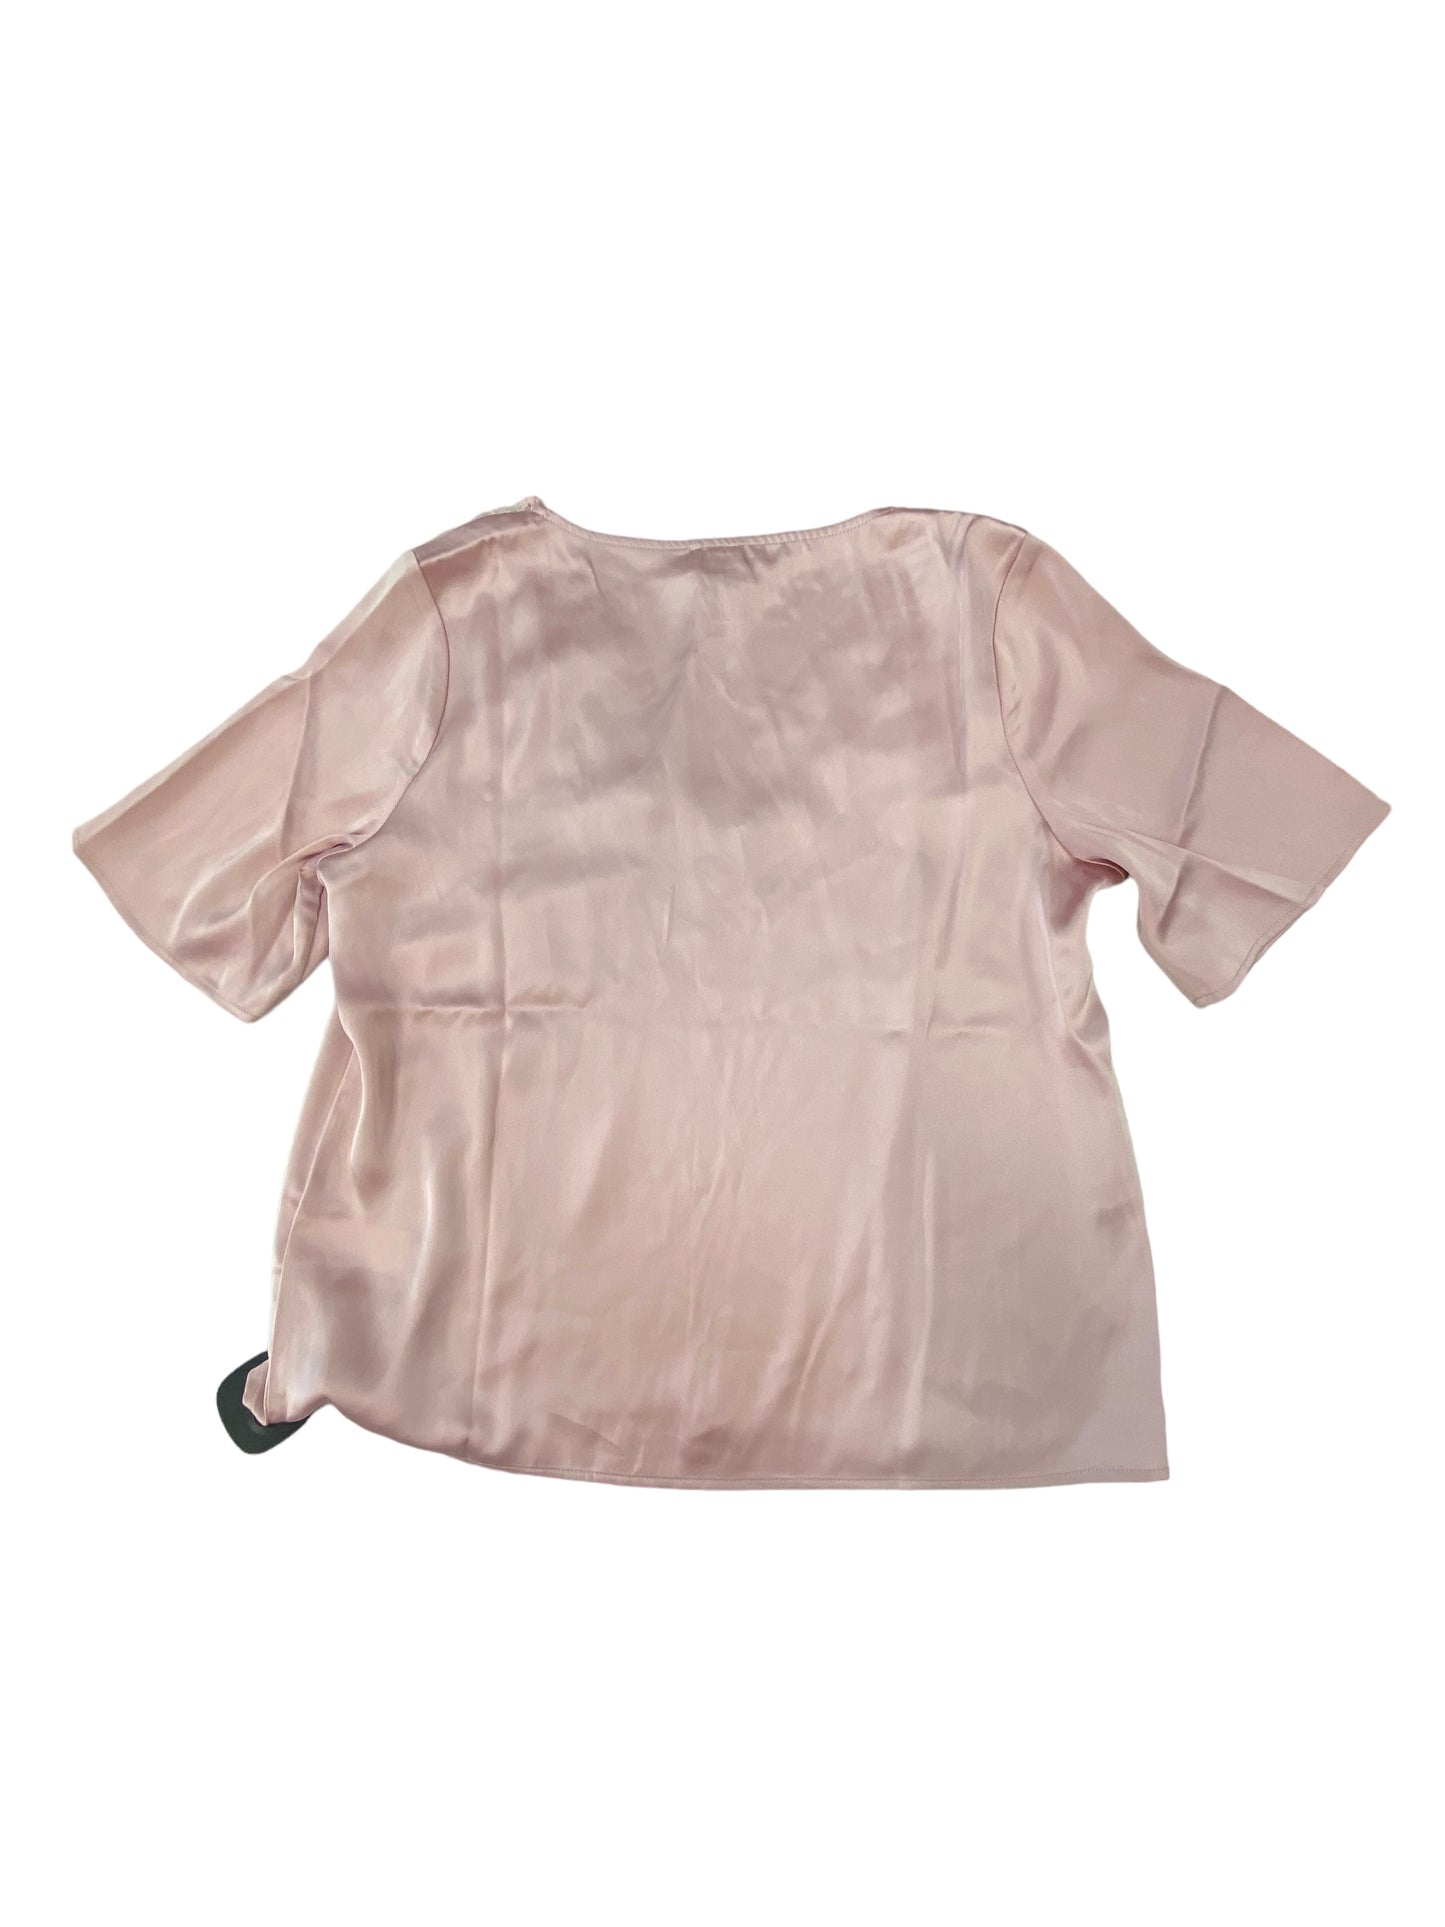 Pink Top Short Sleeve Joie, Size S